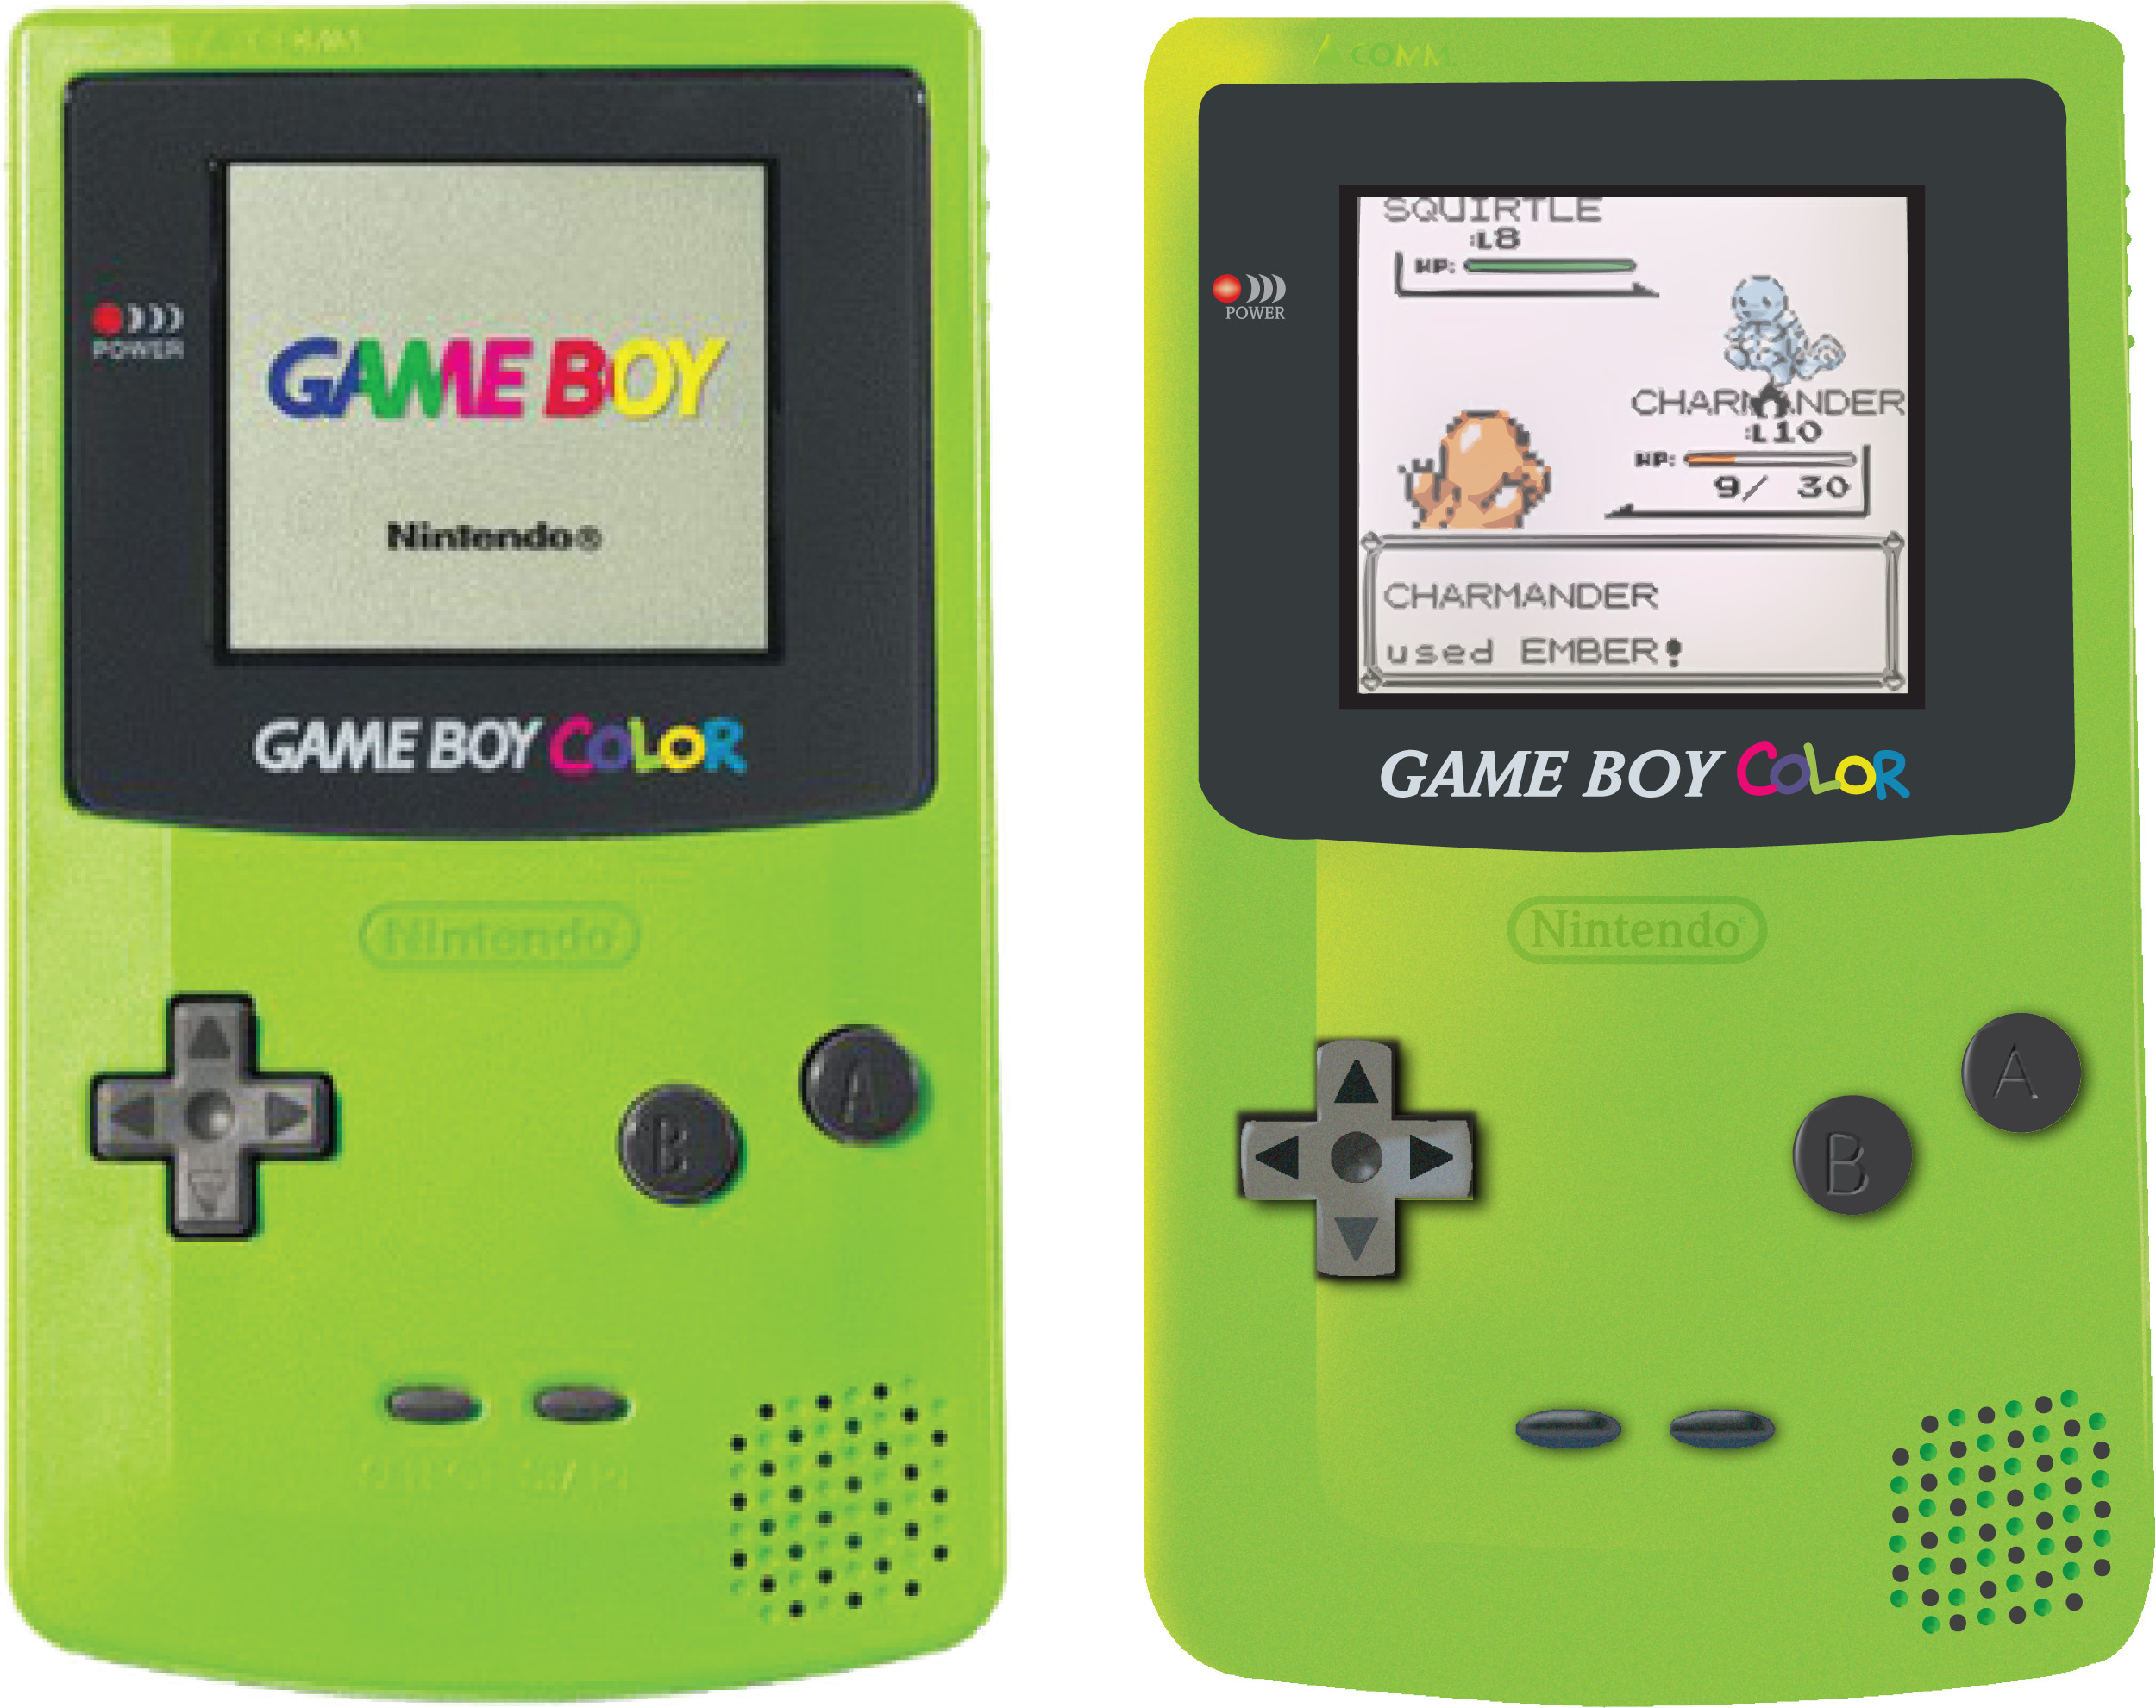 10 Best Game Boy Color Games of All-Time